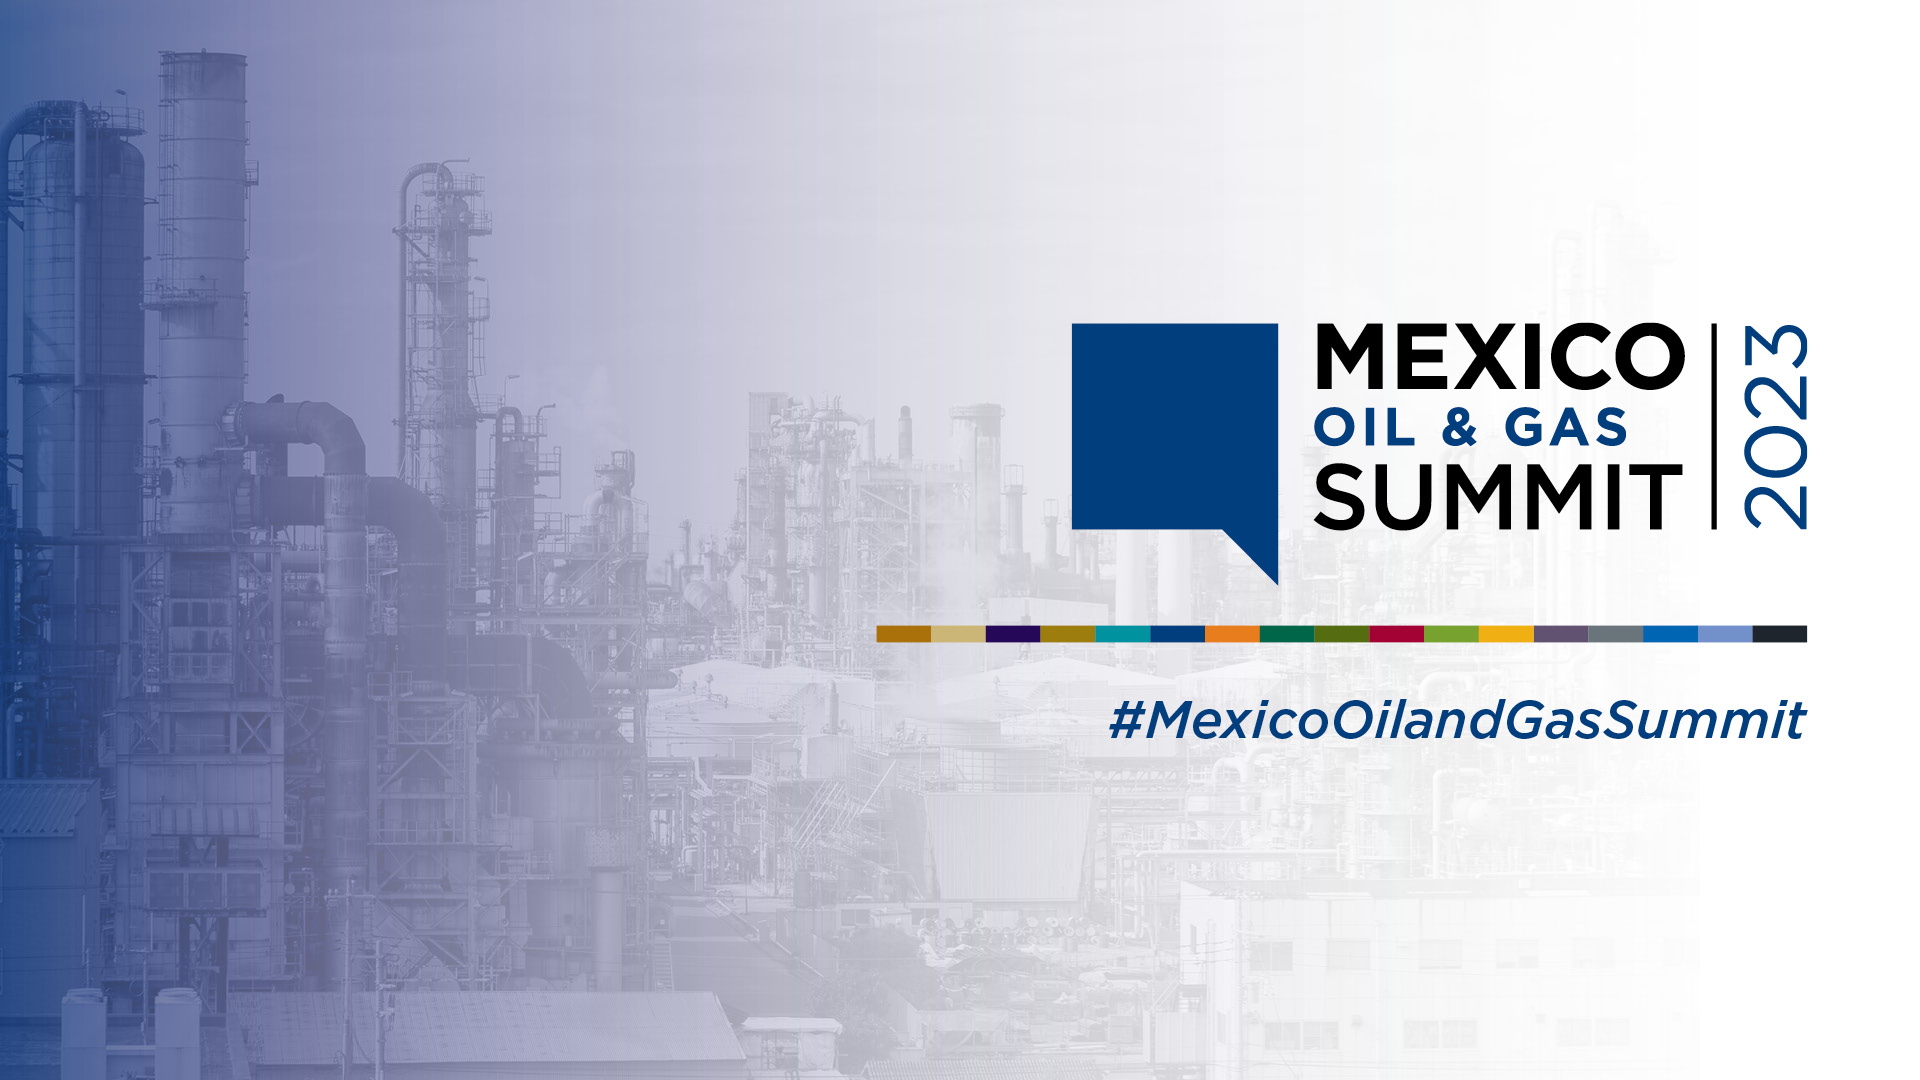 Mexico Oil & Gas Summit Mexico Oil & Gas Summit Mexico Business Events